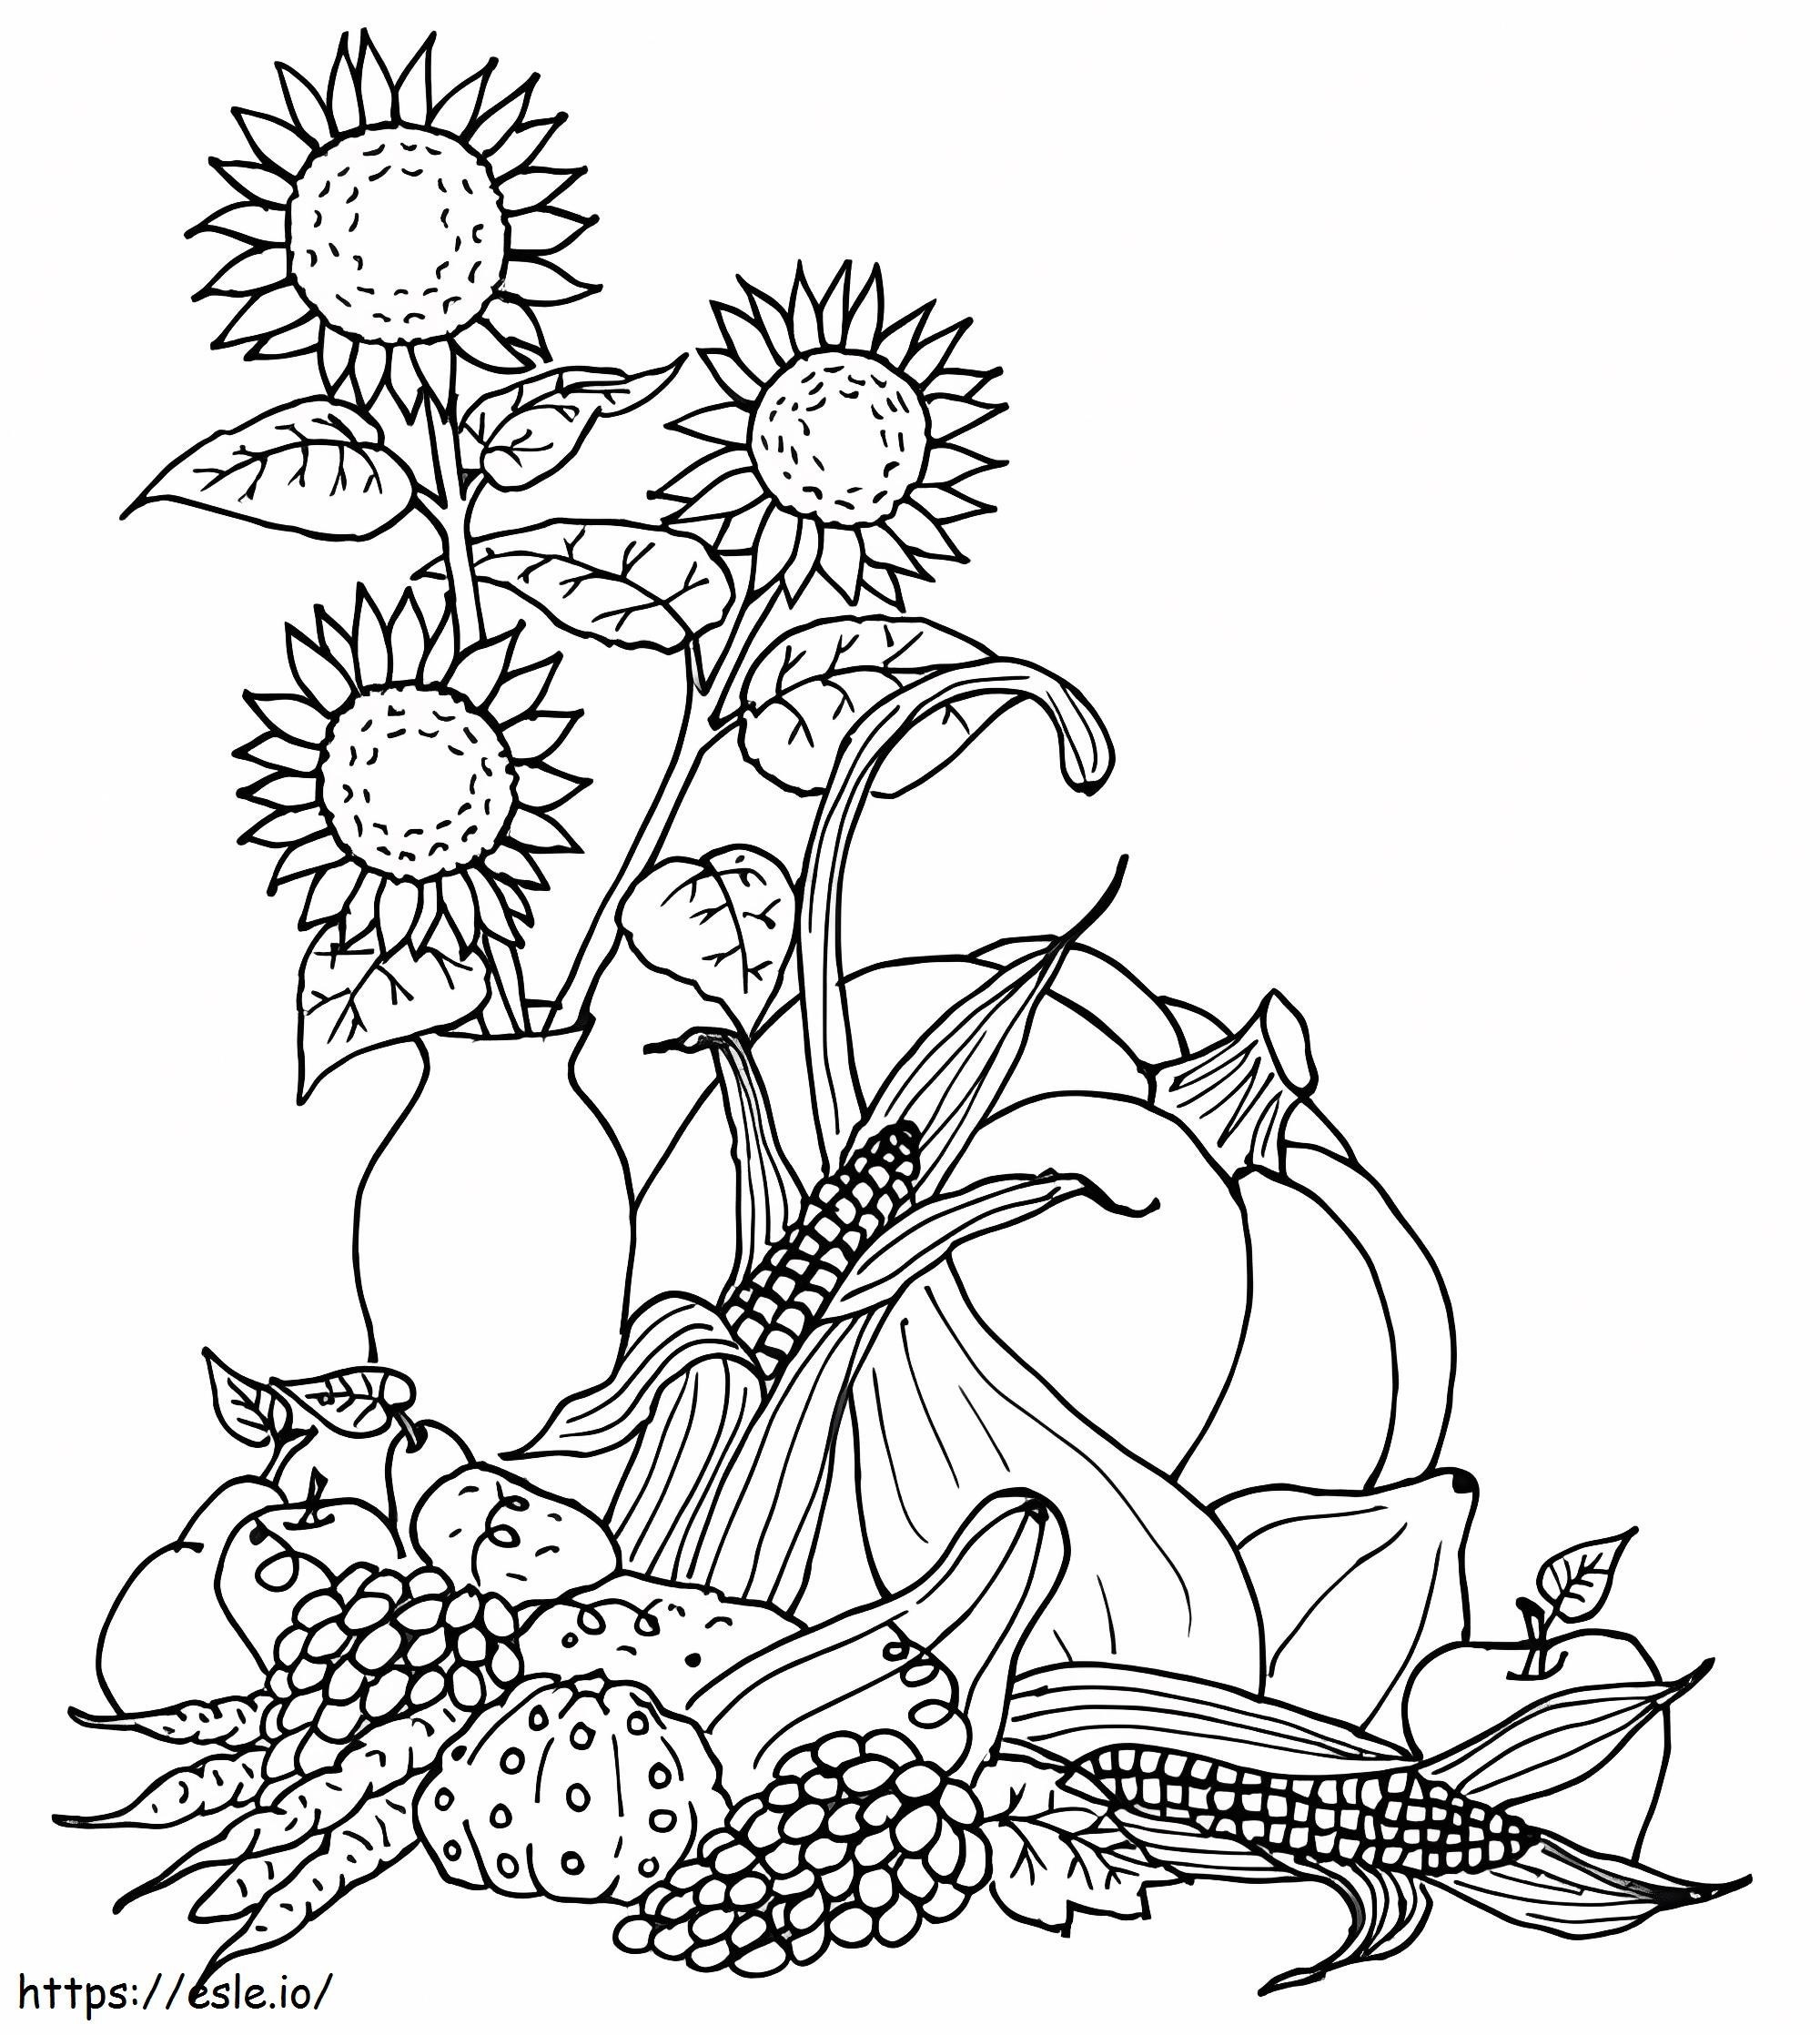 Fall Harvest 4 coloring page